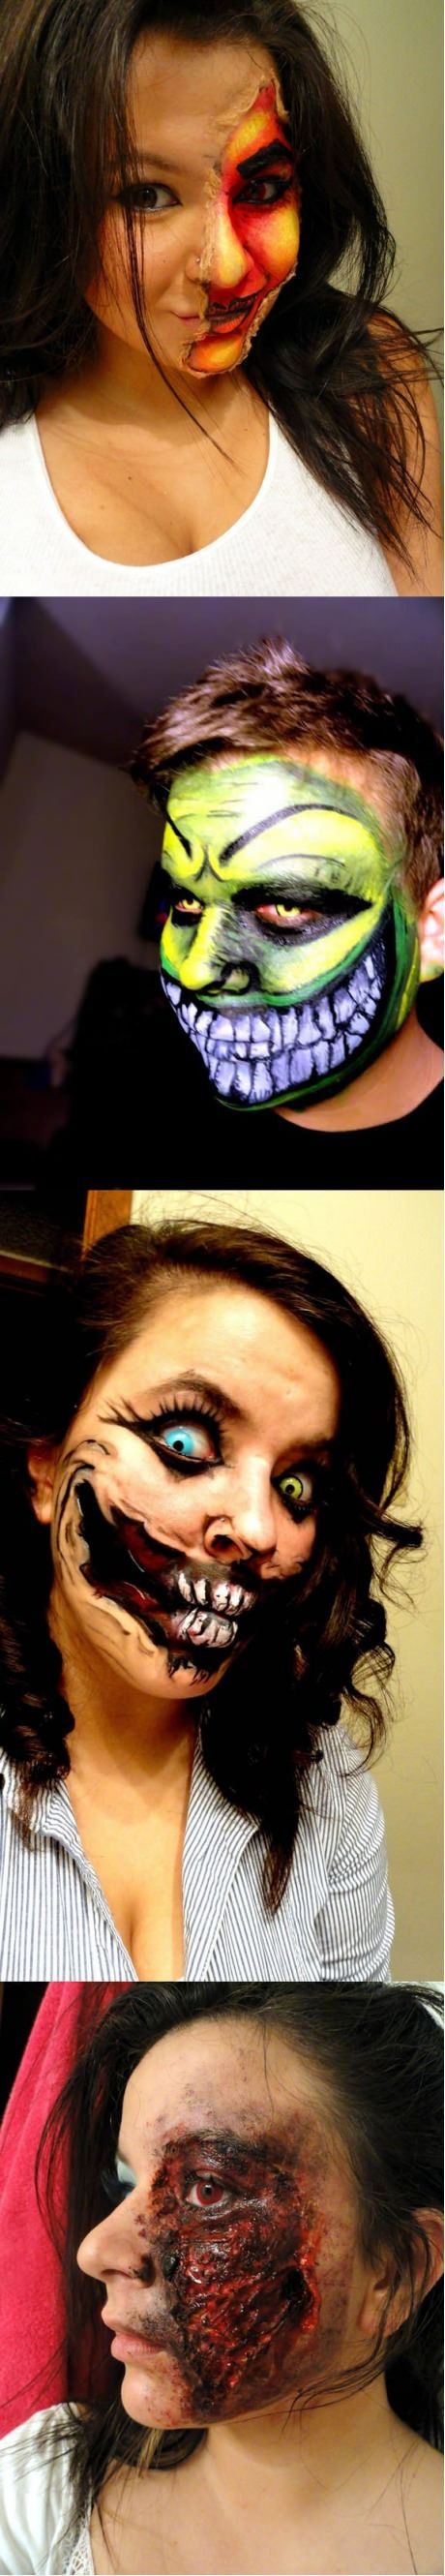 Halloween face painting.